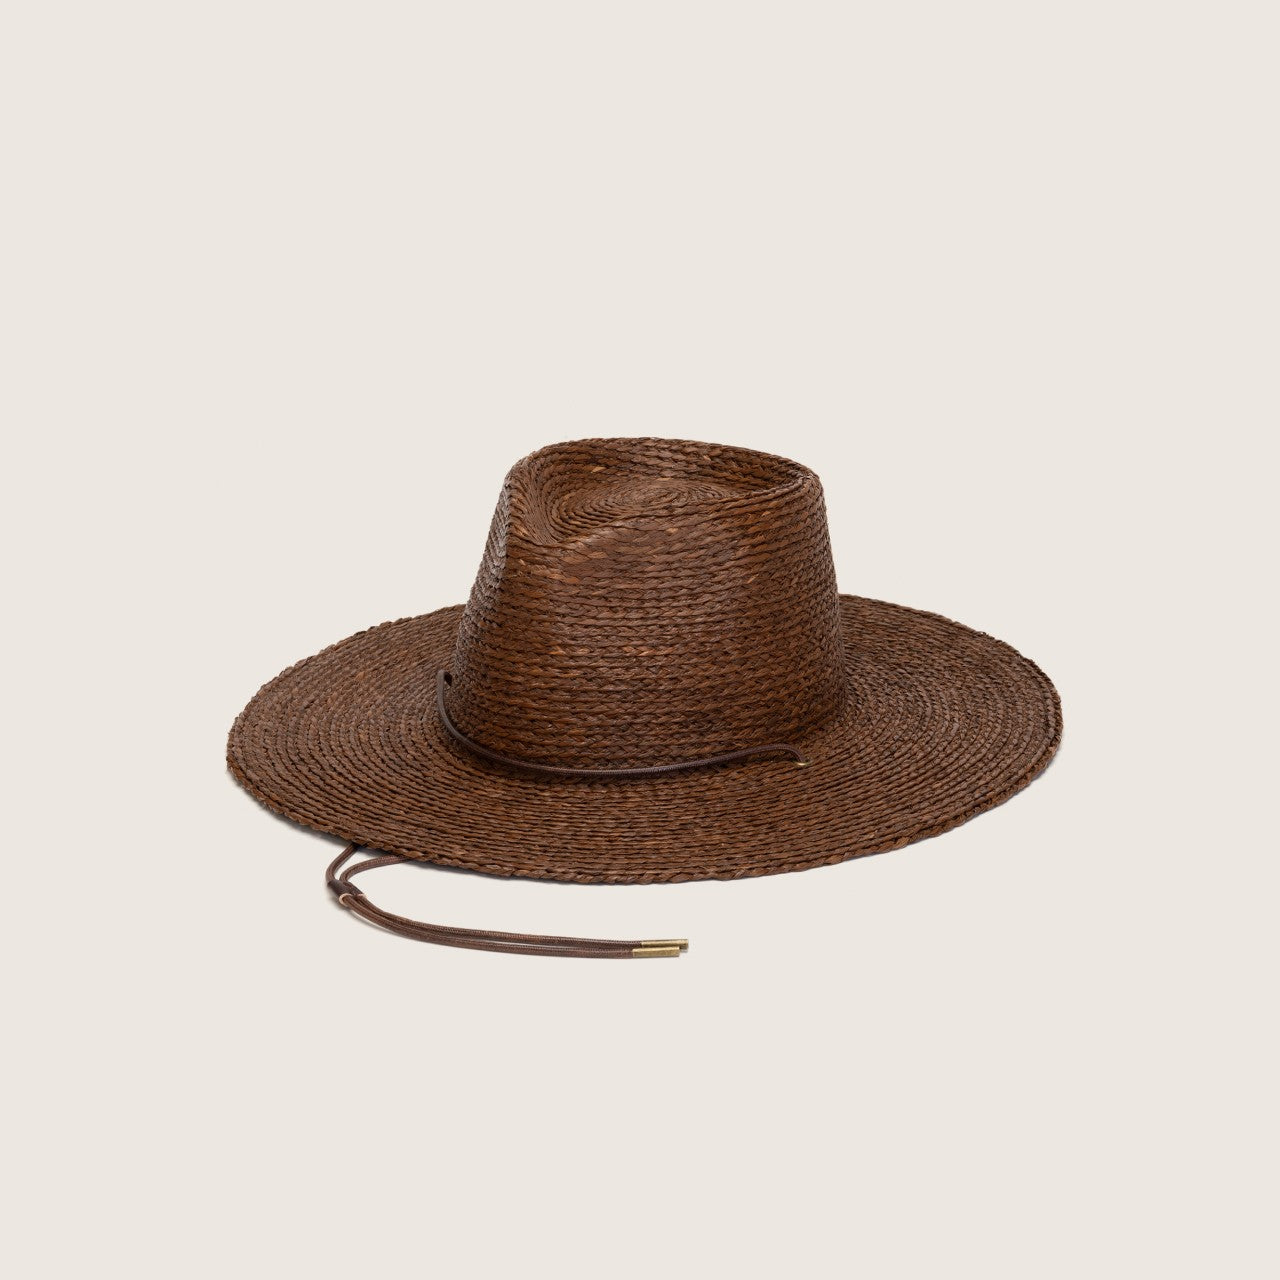 Austin Brown straw hat in the studio front view